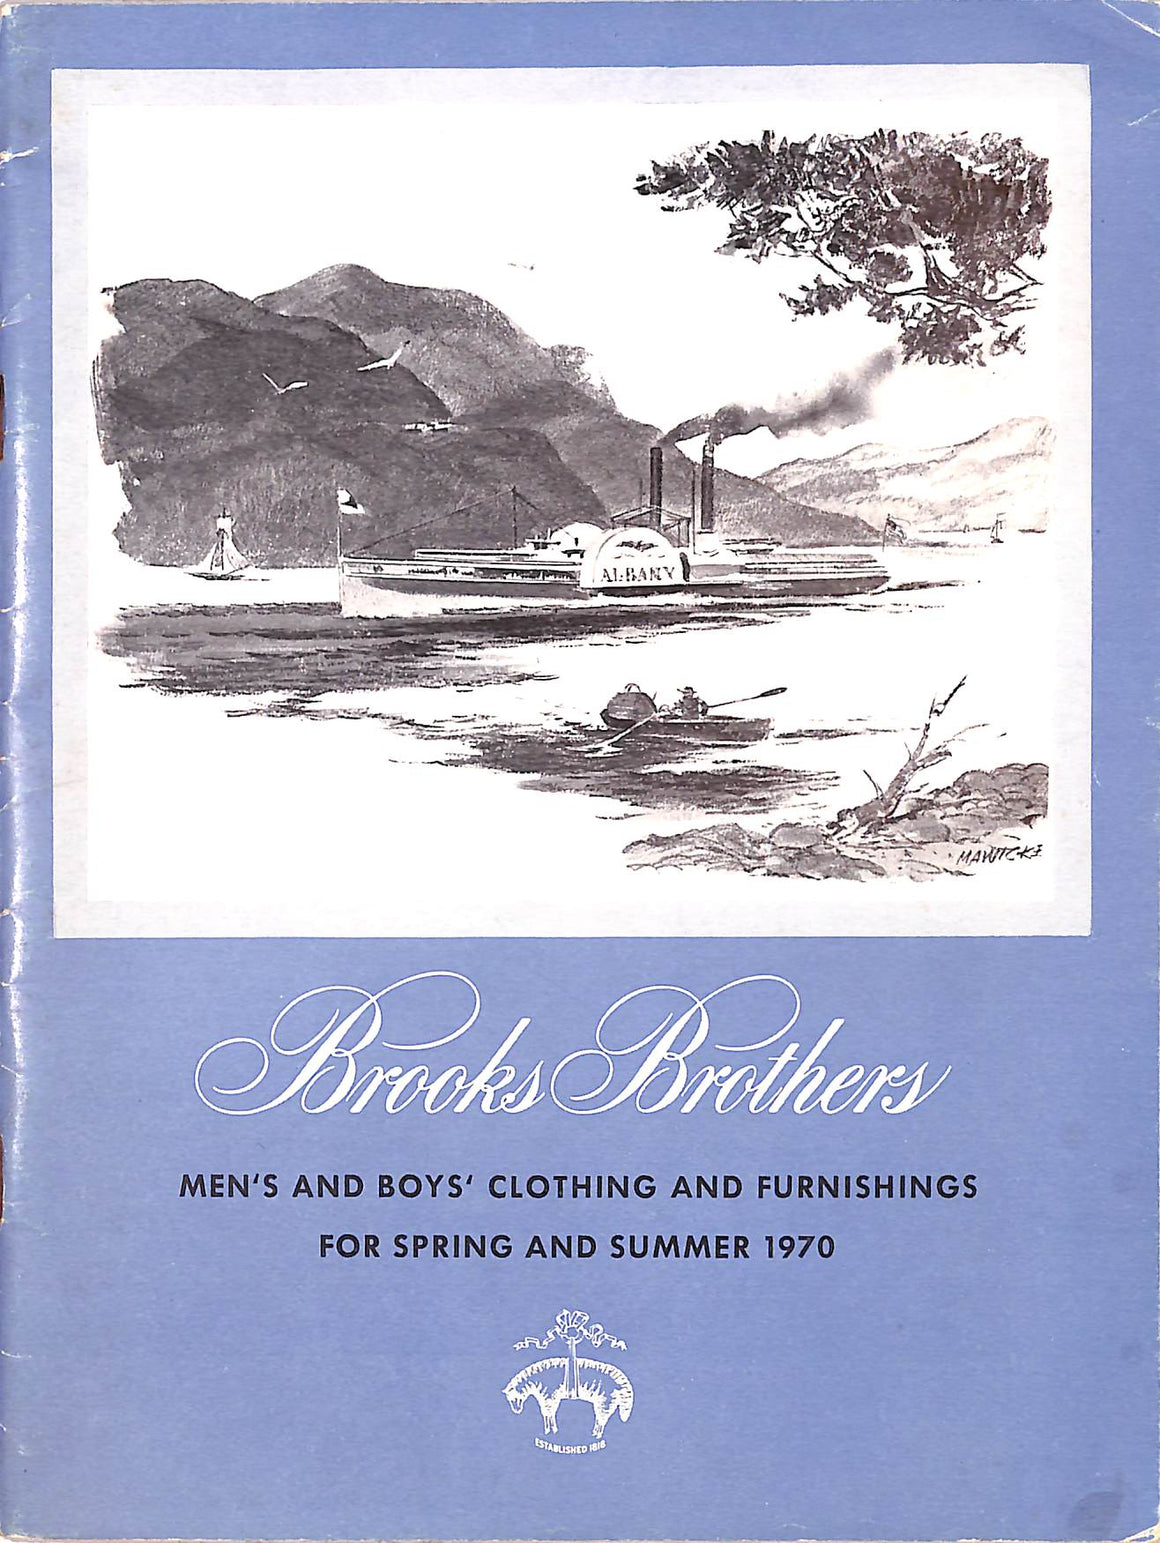 "Brooks Brothers Men's And Boys' Clothing For Spring And Summer" 1970